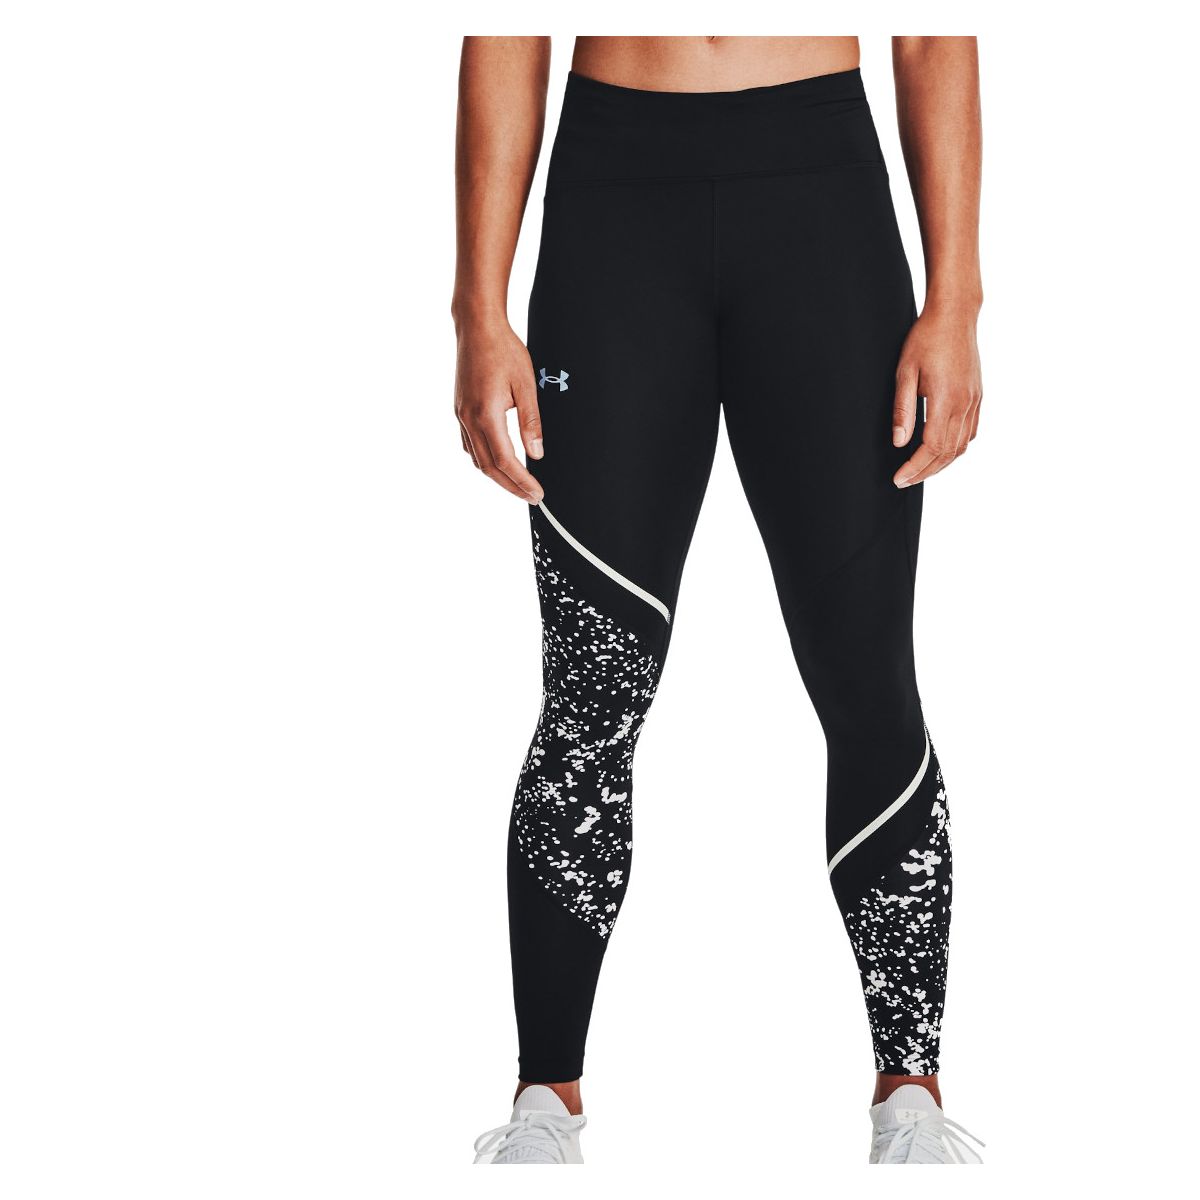 Under Armour Fly Fast 2.0 Print Women's Tights 1361385-001